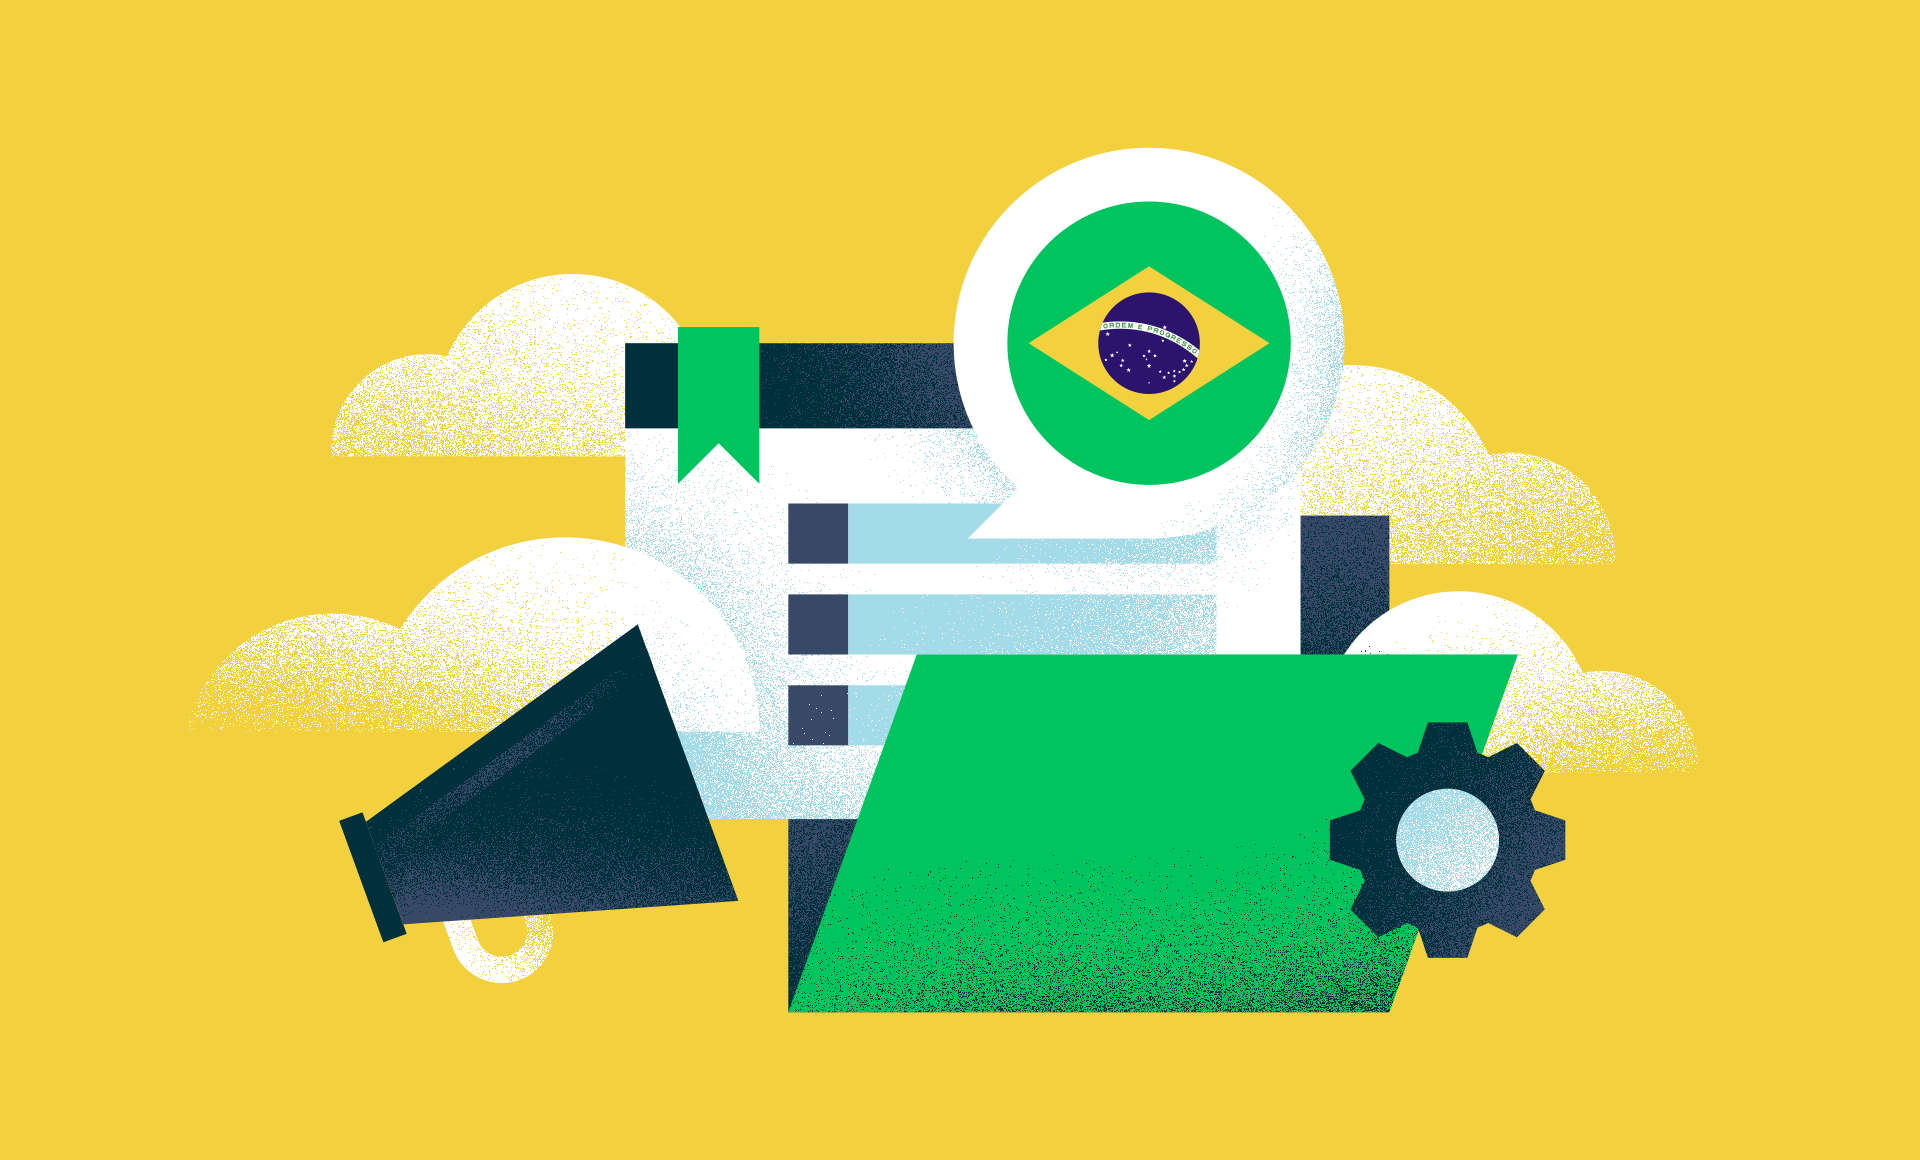 Read more about What’s New in Kira: 40 Smart Fields in Brazilian Portuguese